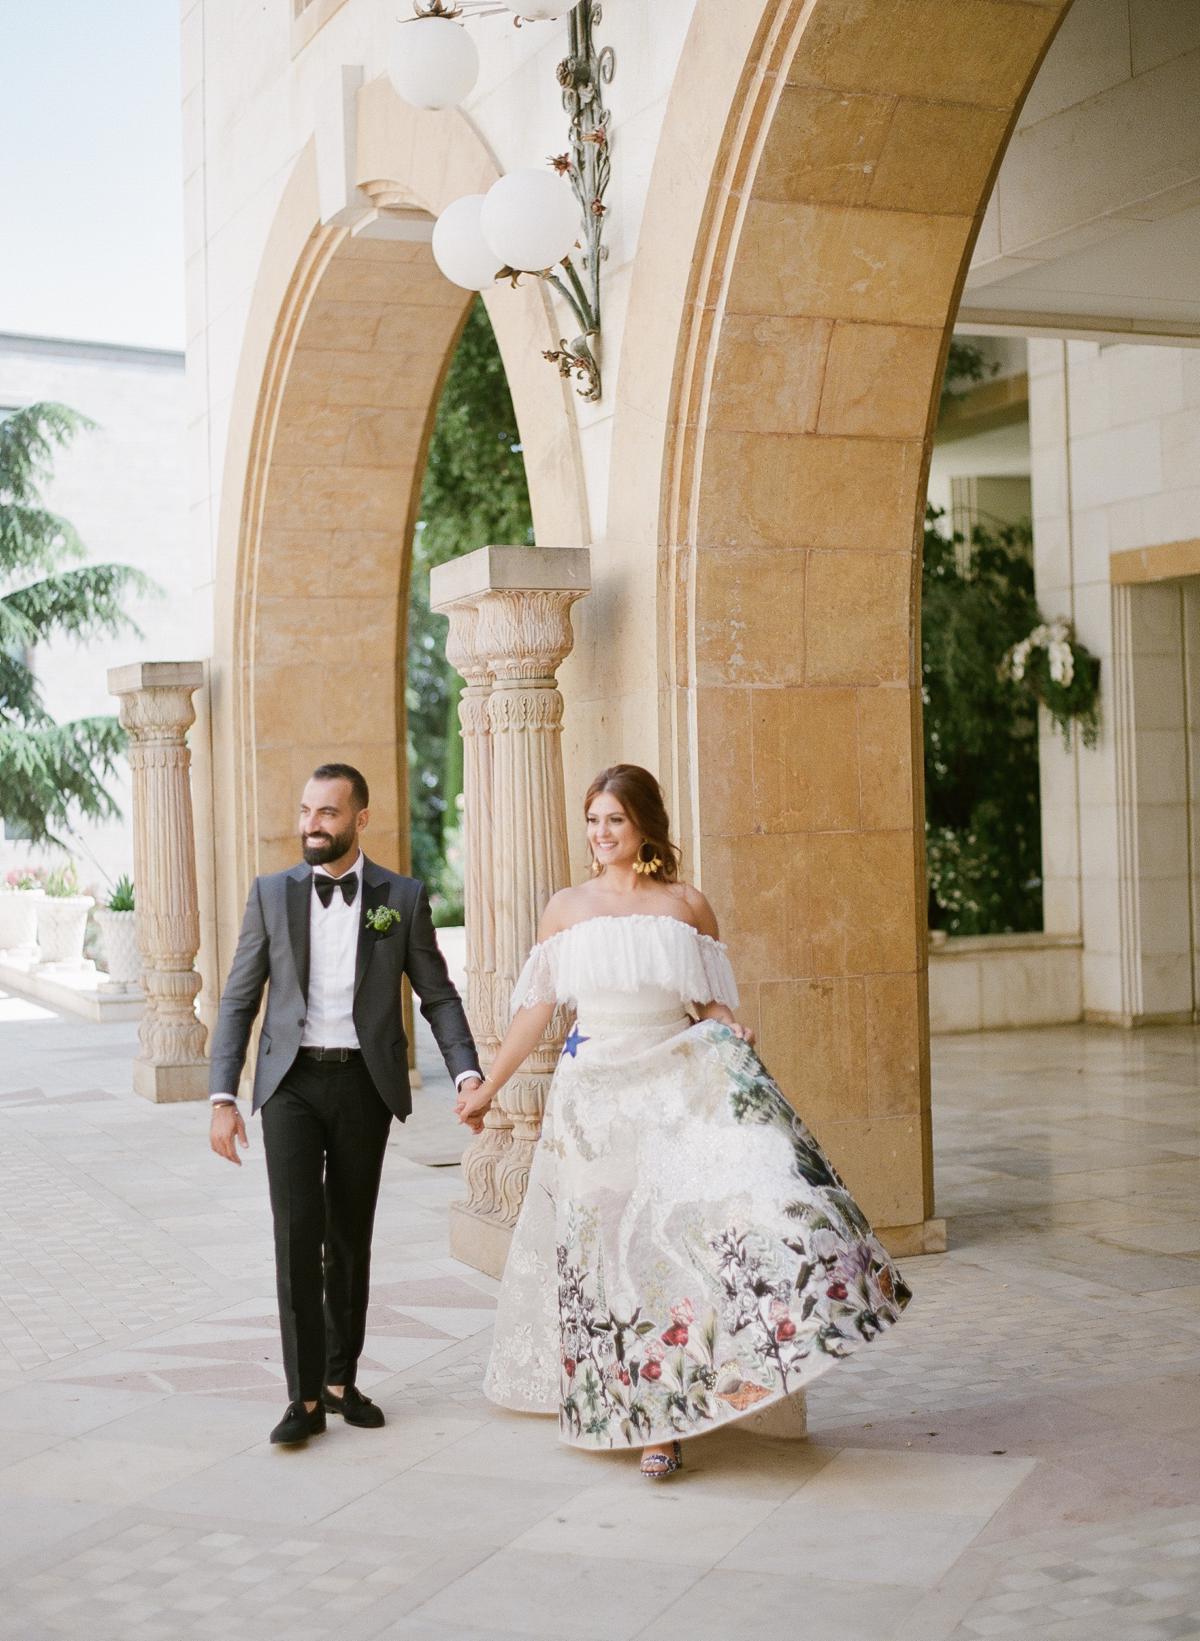 Bride and groom portrait session in Beirut Lebanon 